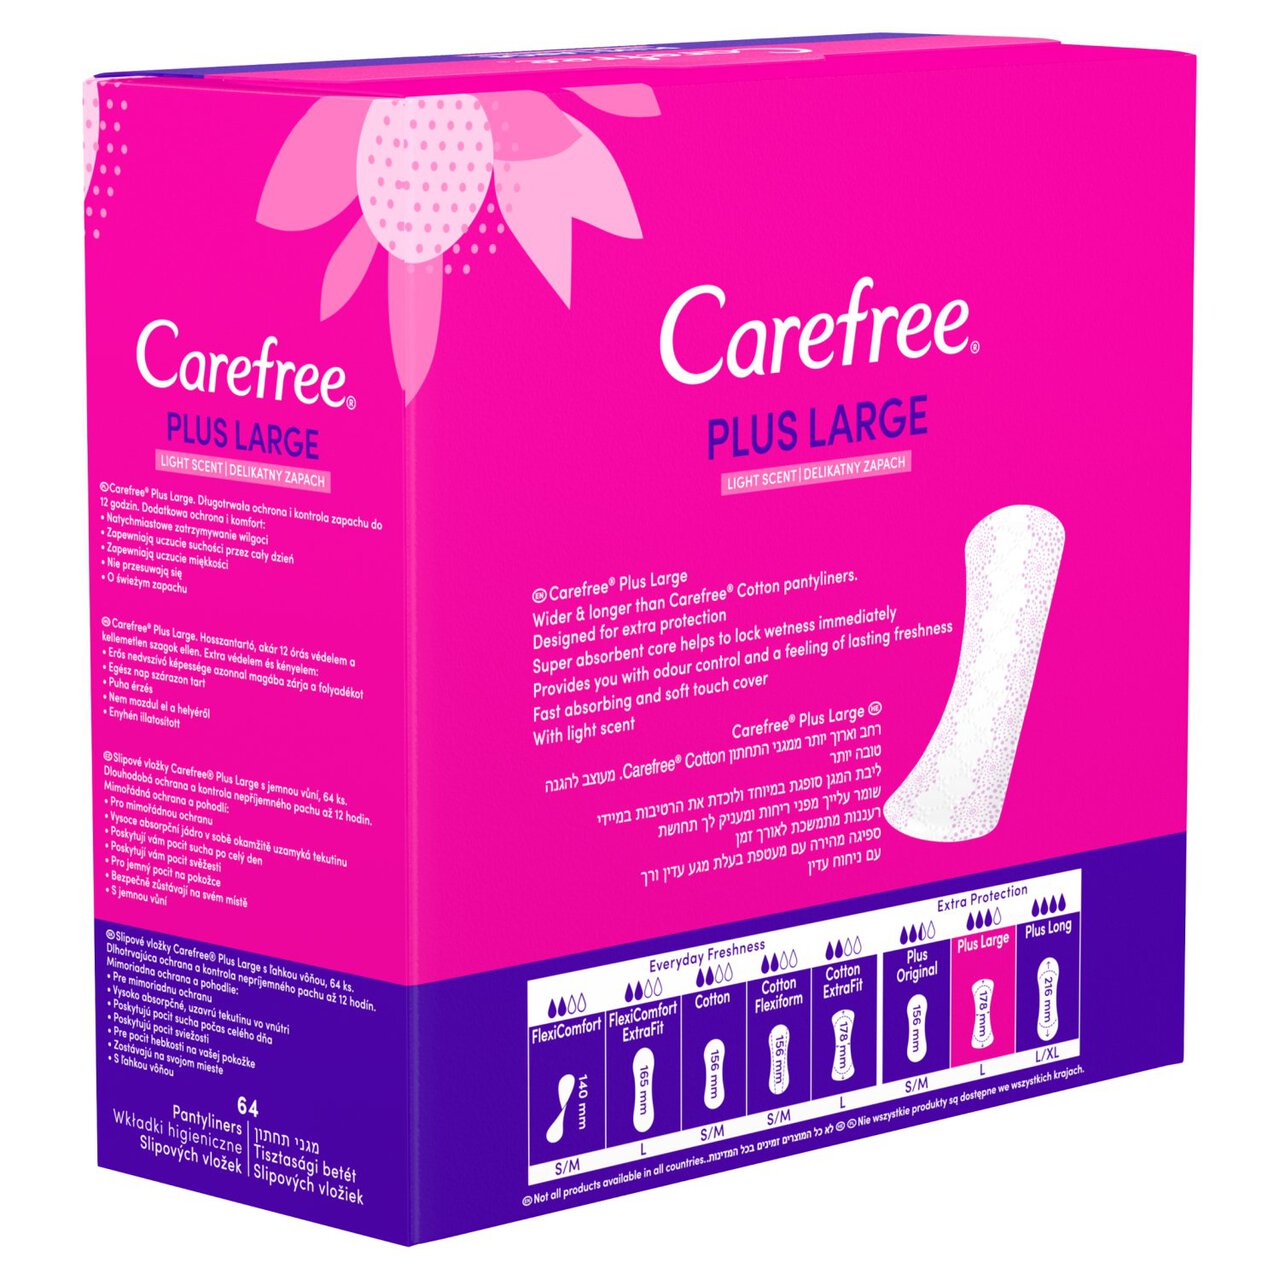 Carefree Plus Large Light Scent Pantyliners 64 per pack